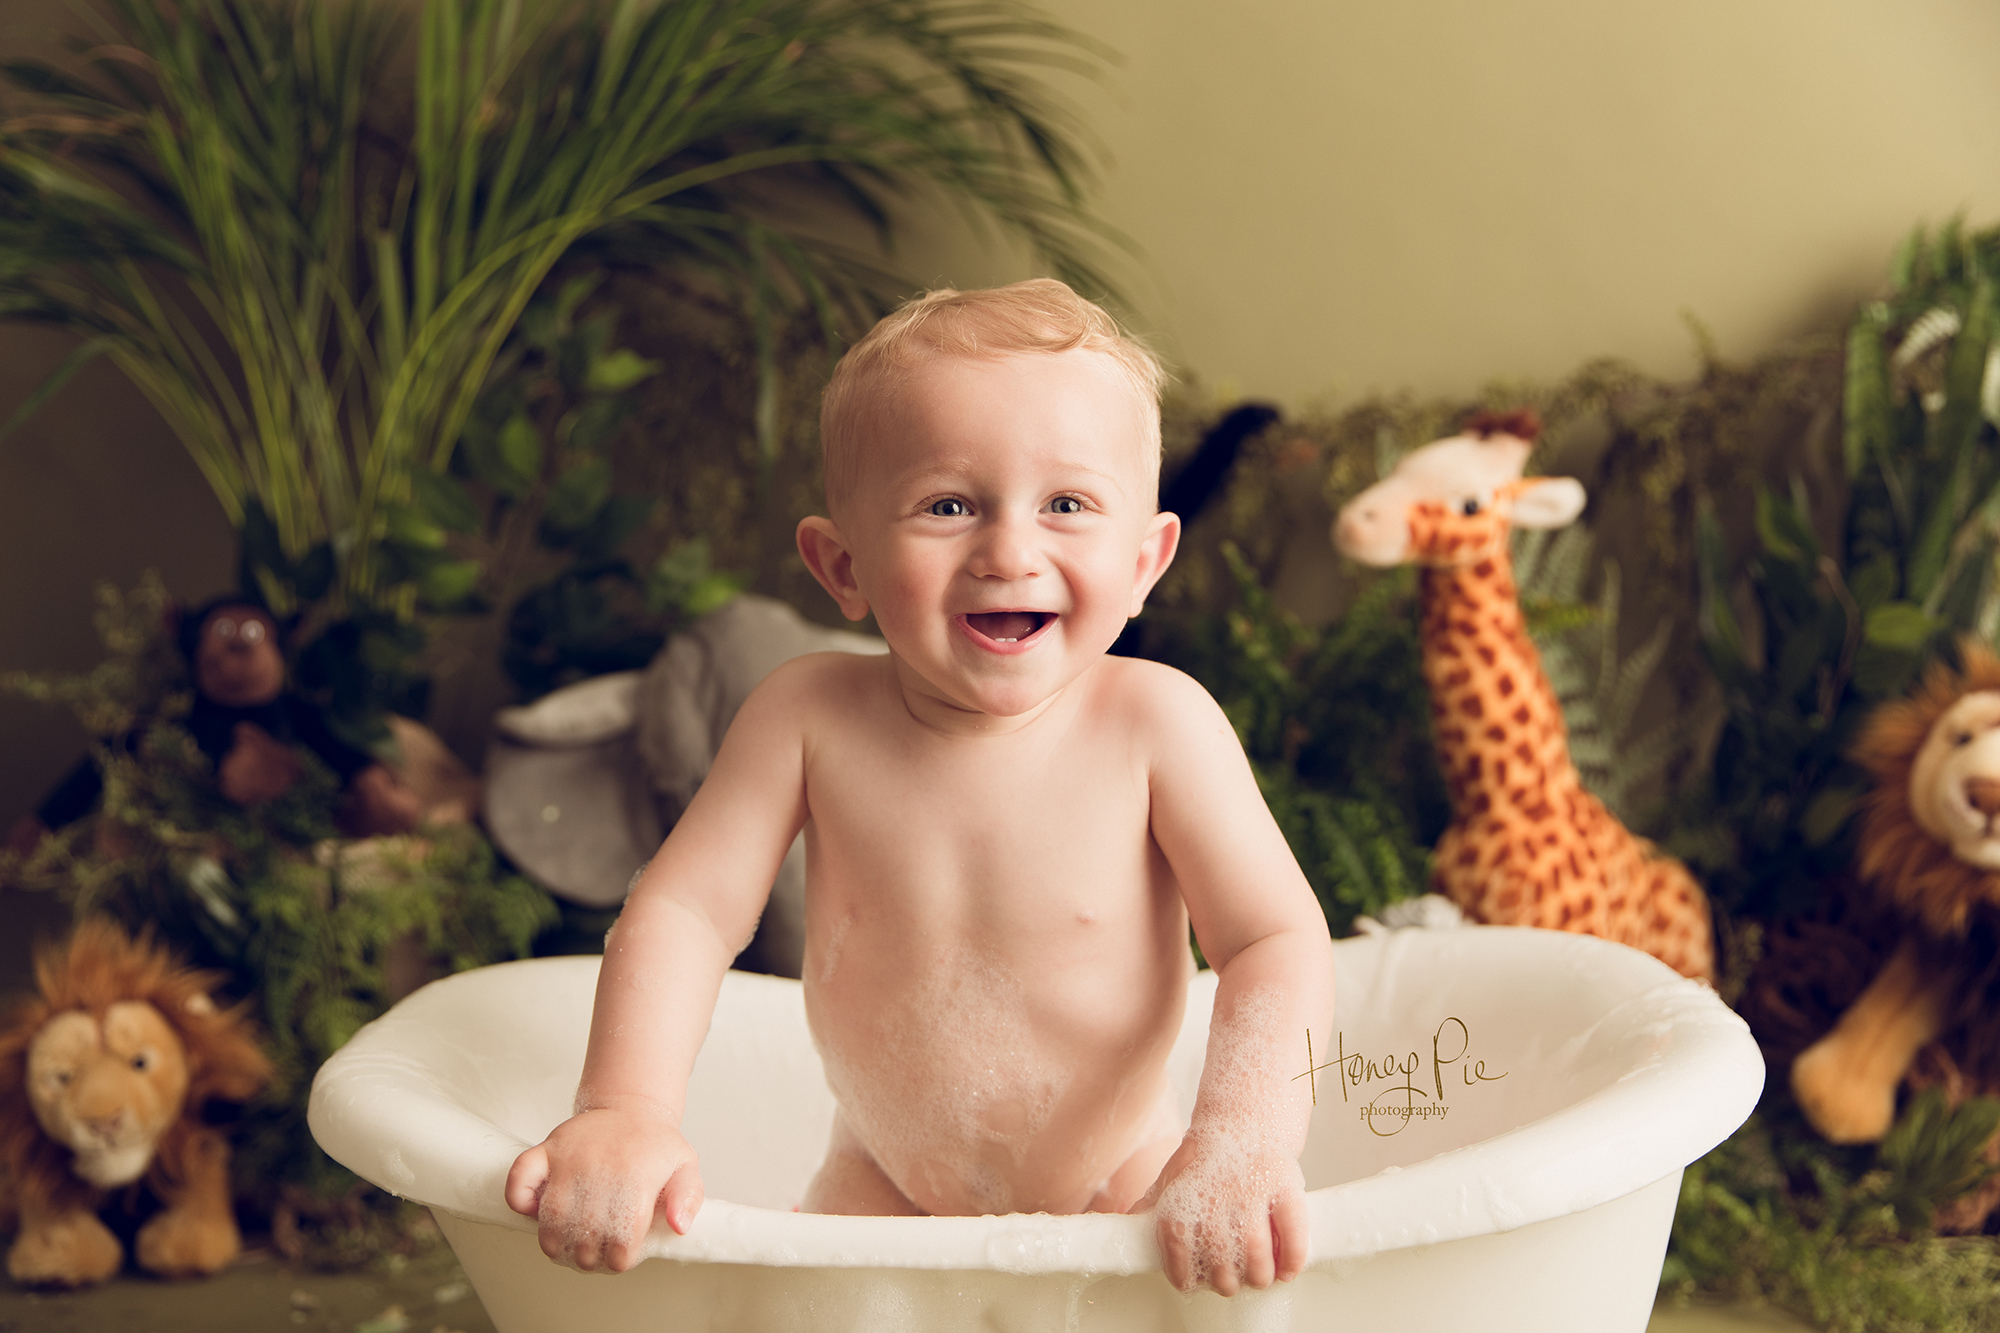 Birthday baby boy with green plants & jungle toys smiling in his bubble bath tub